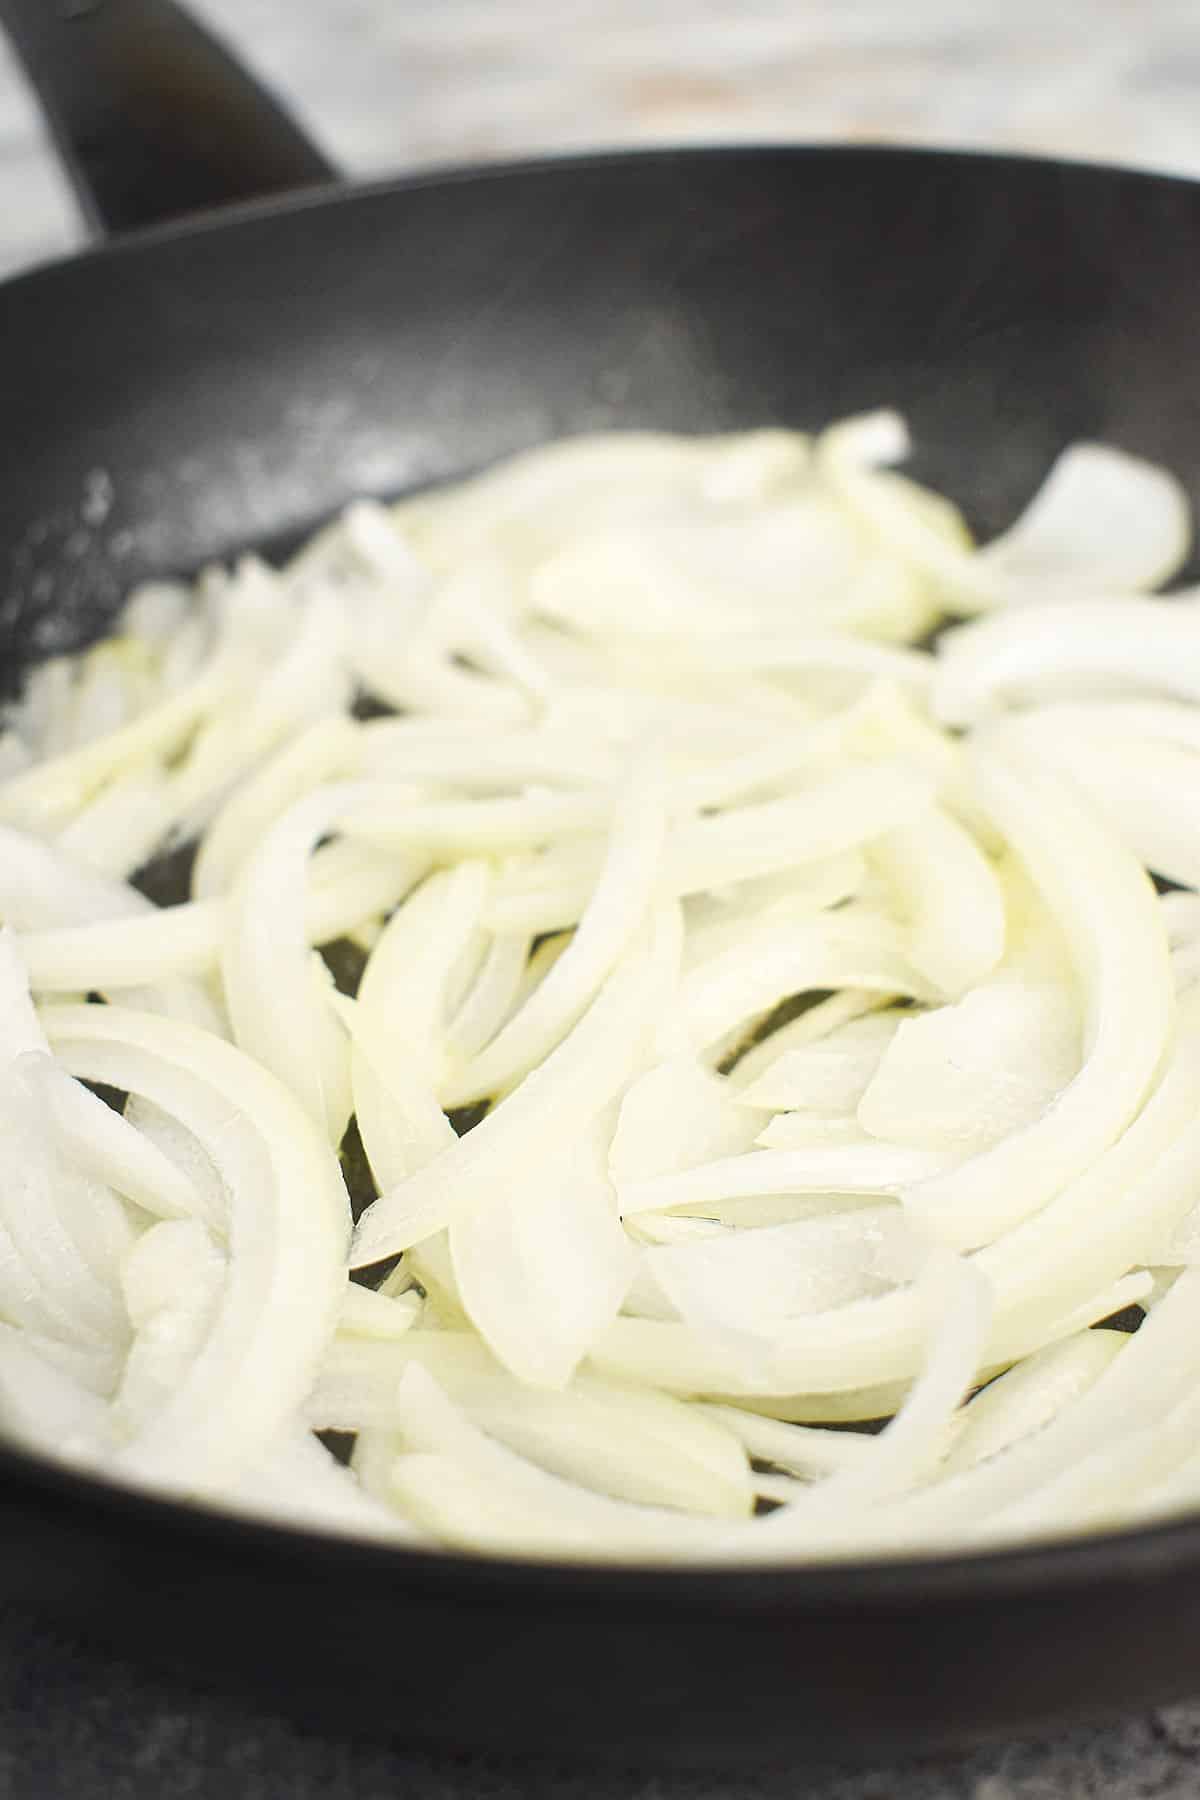 Sliced onions cooking in frying pan.